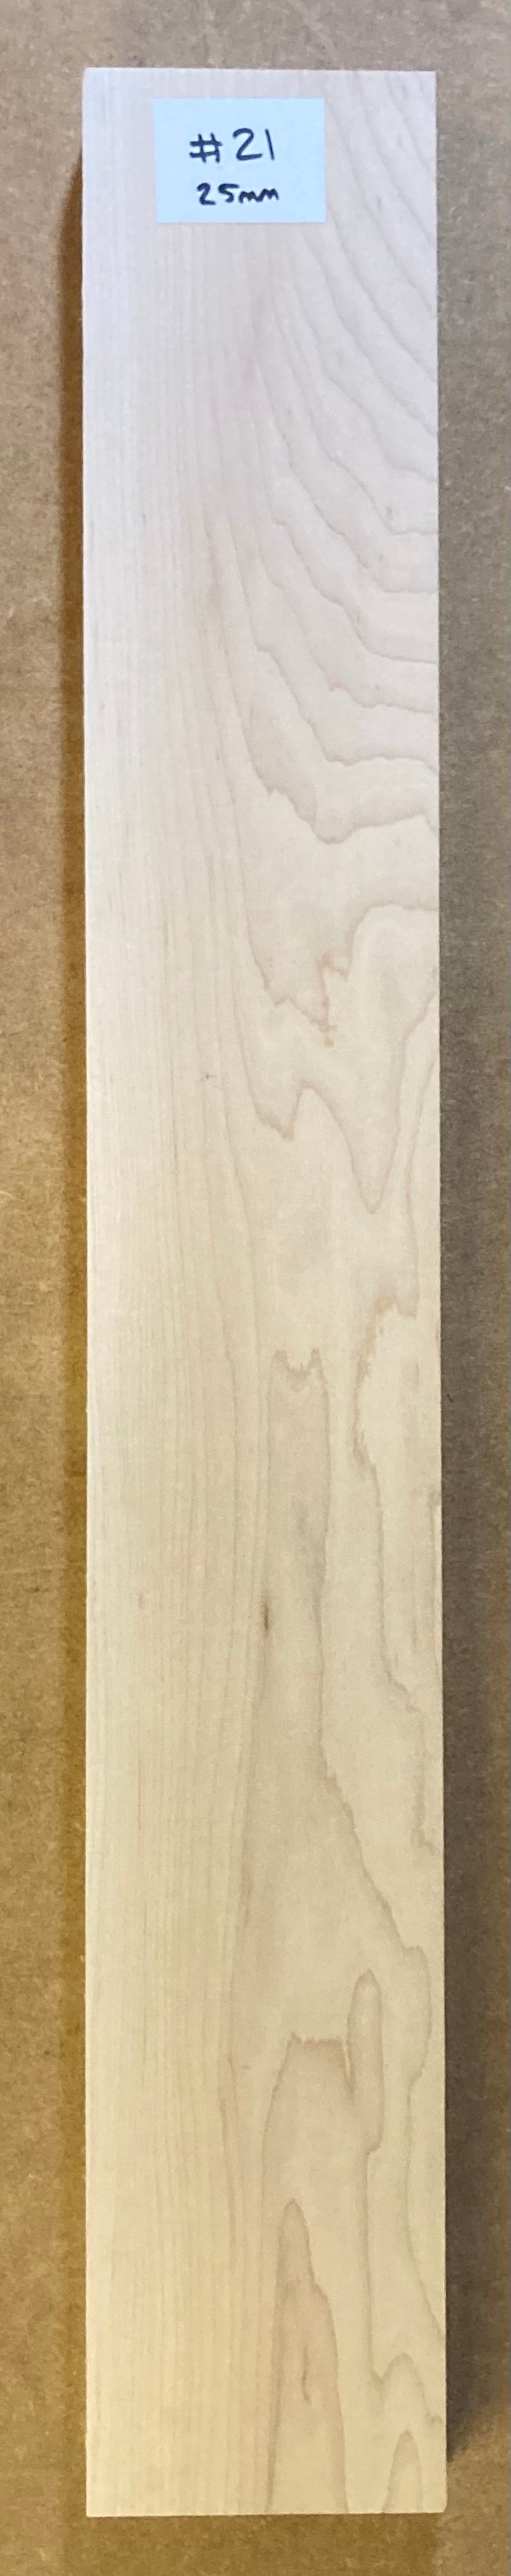 Electric Neck Blank - Maple #21